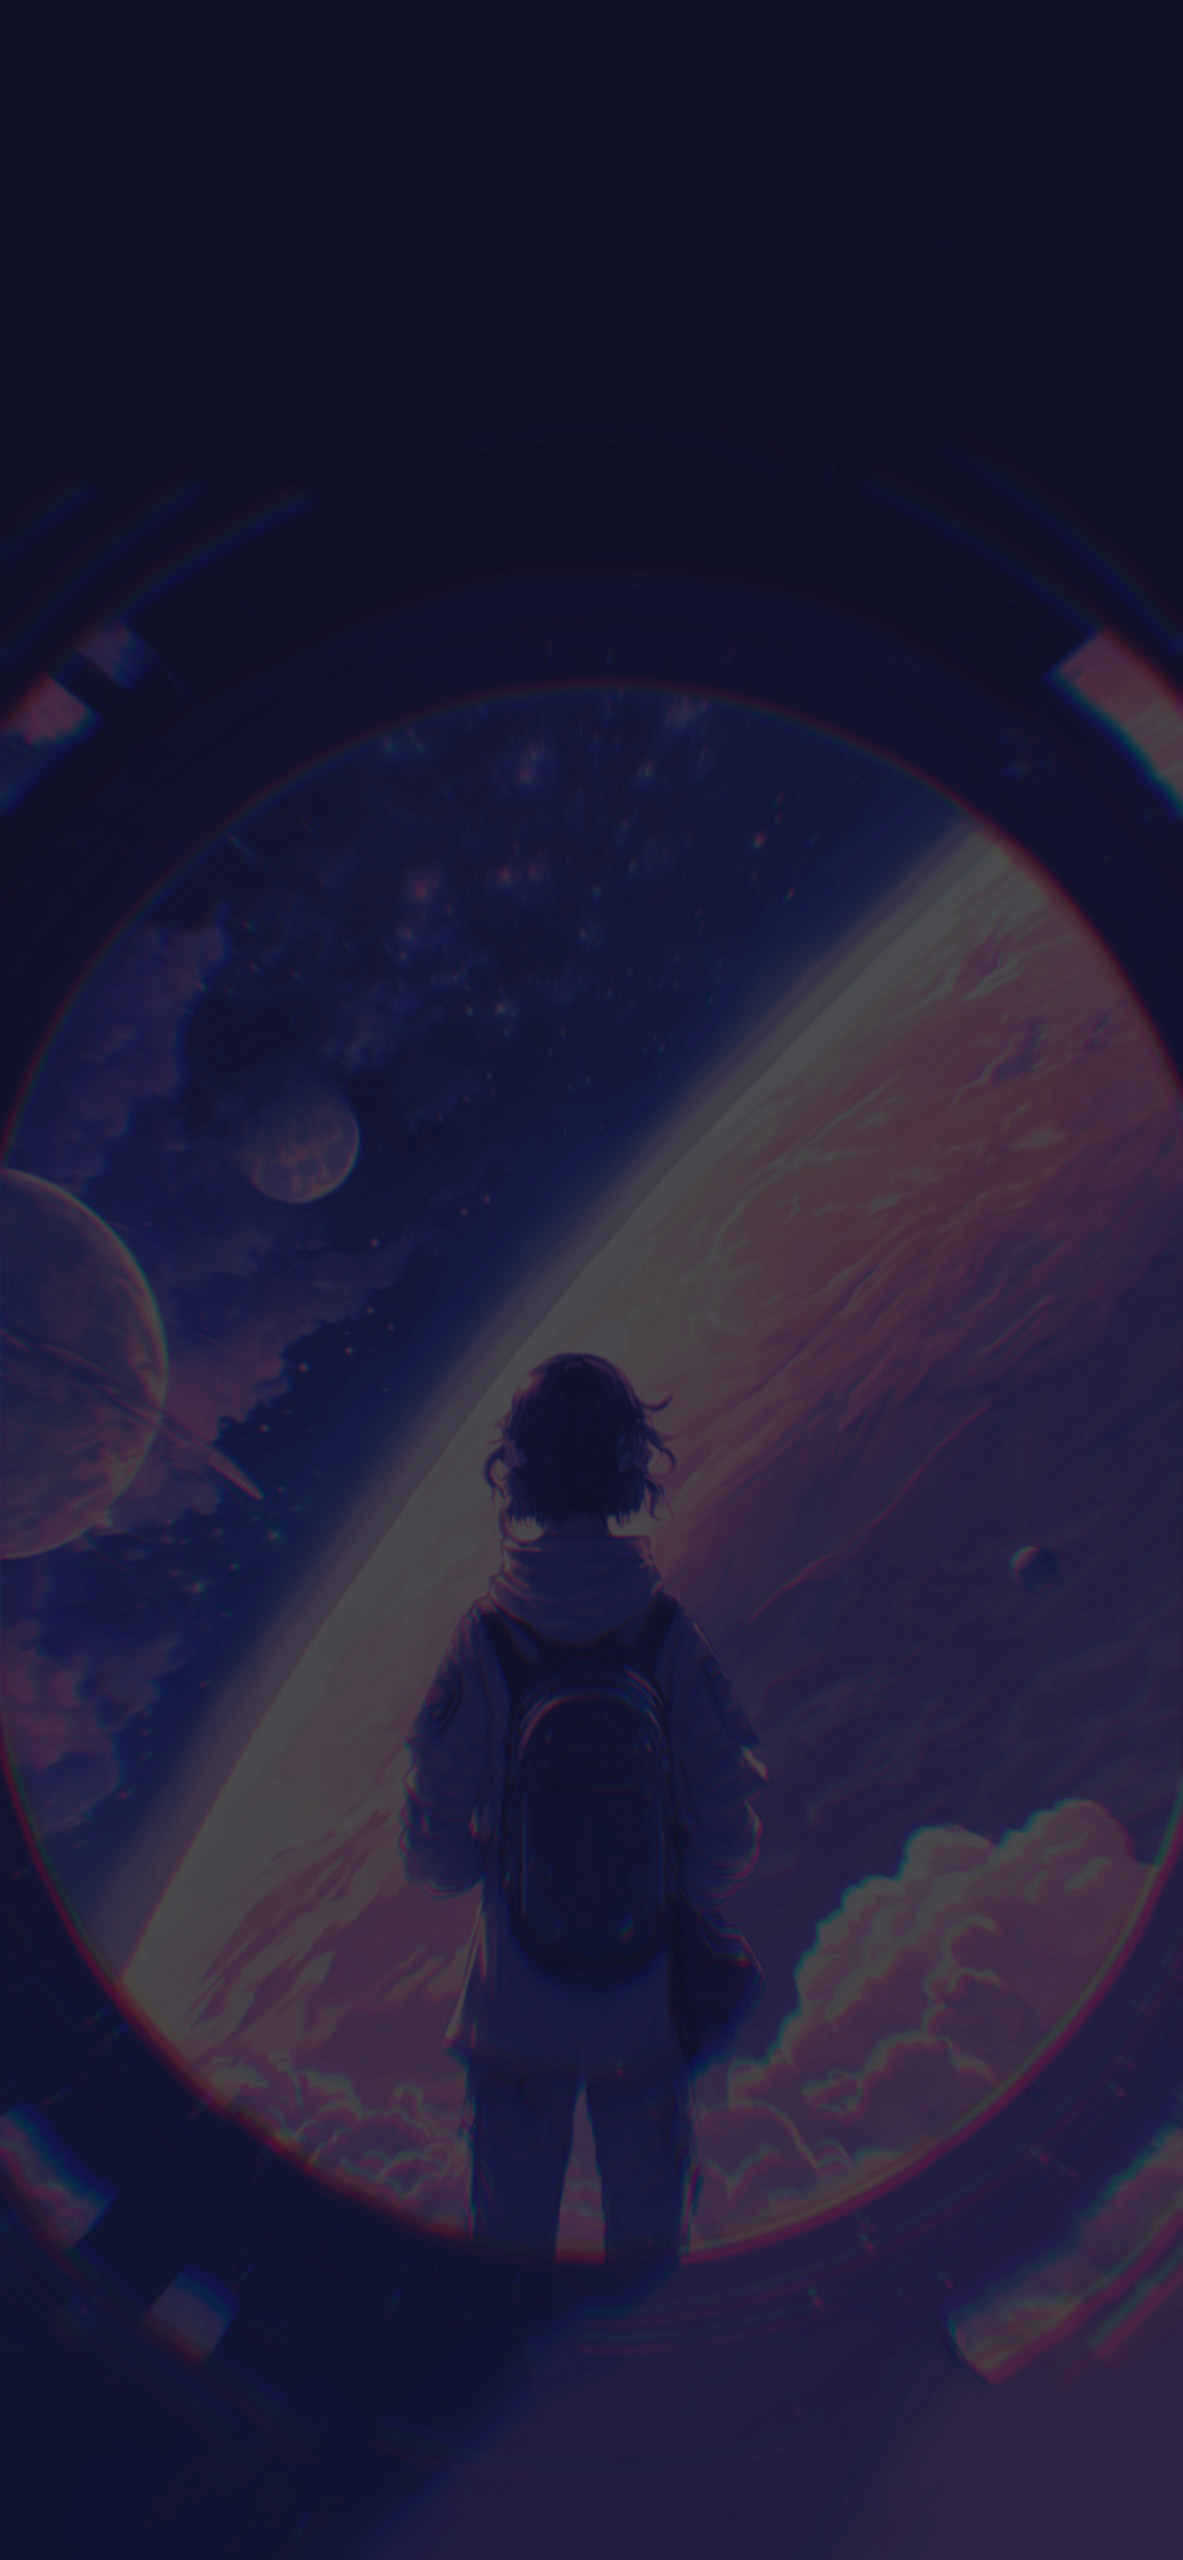 outer space wallpaper